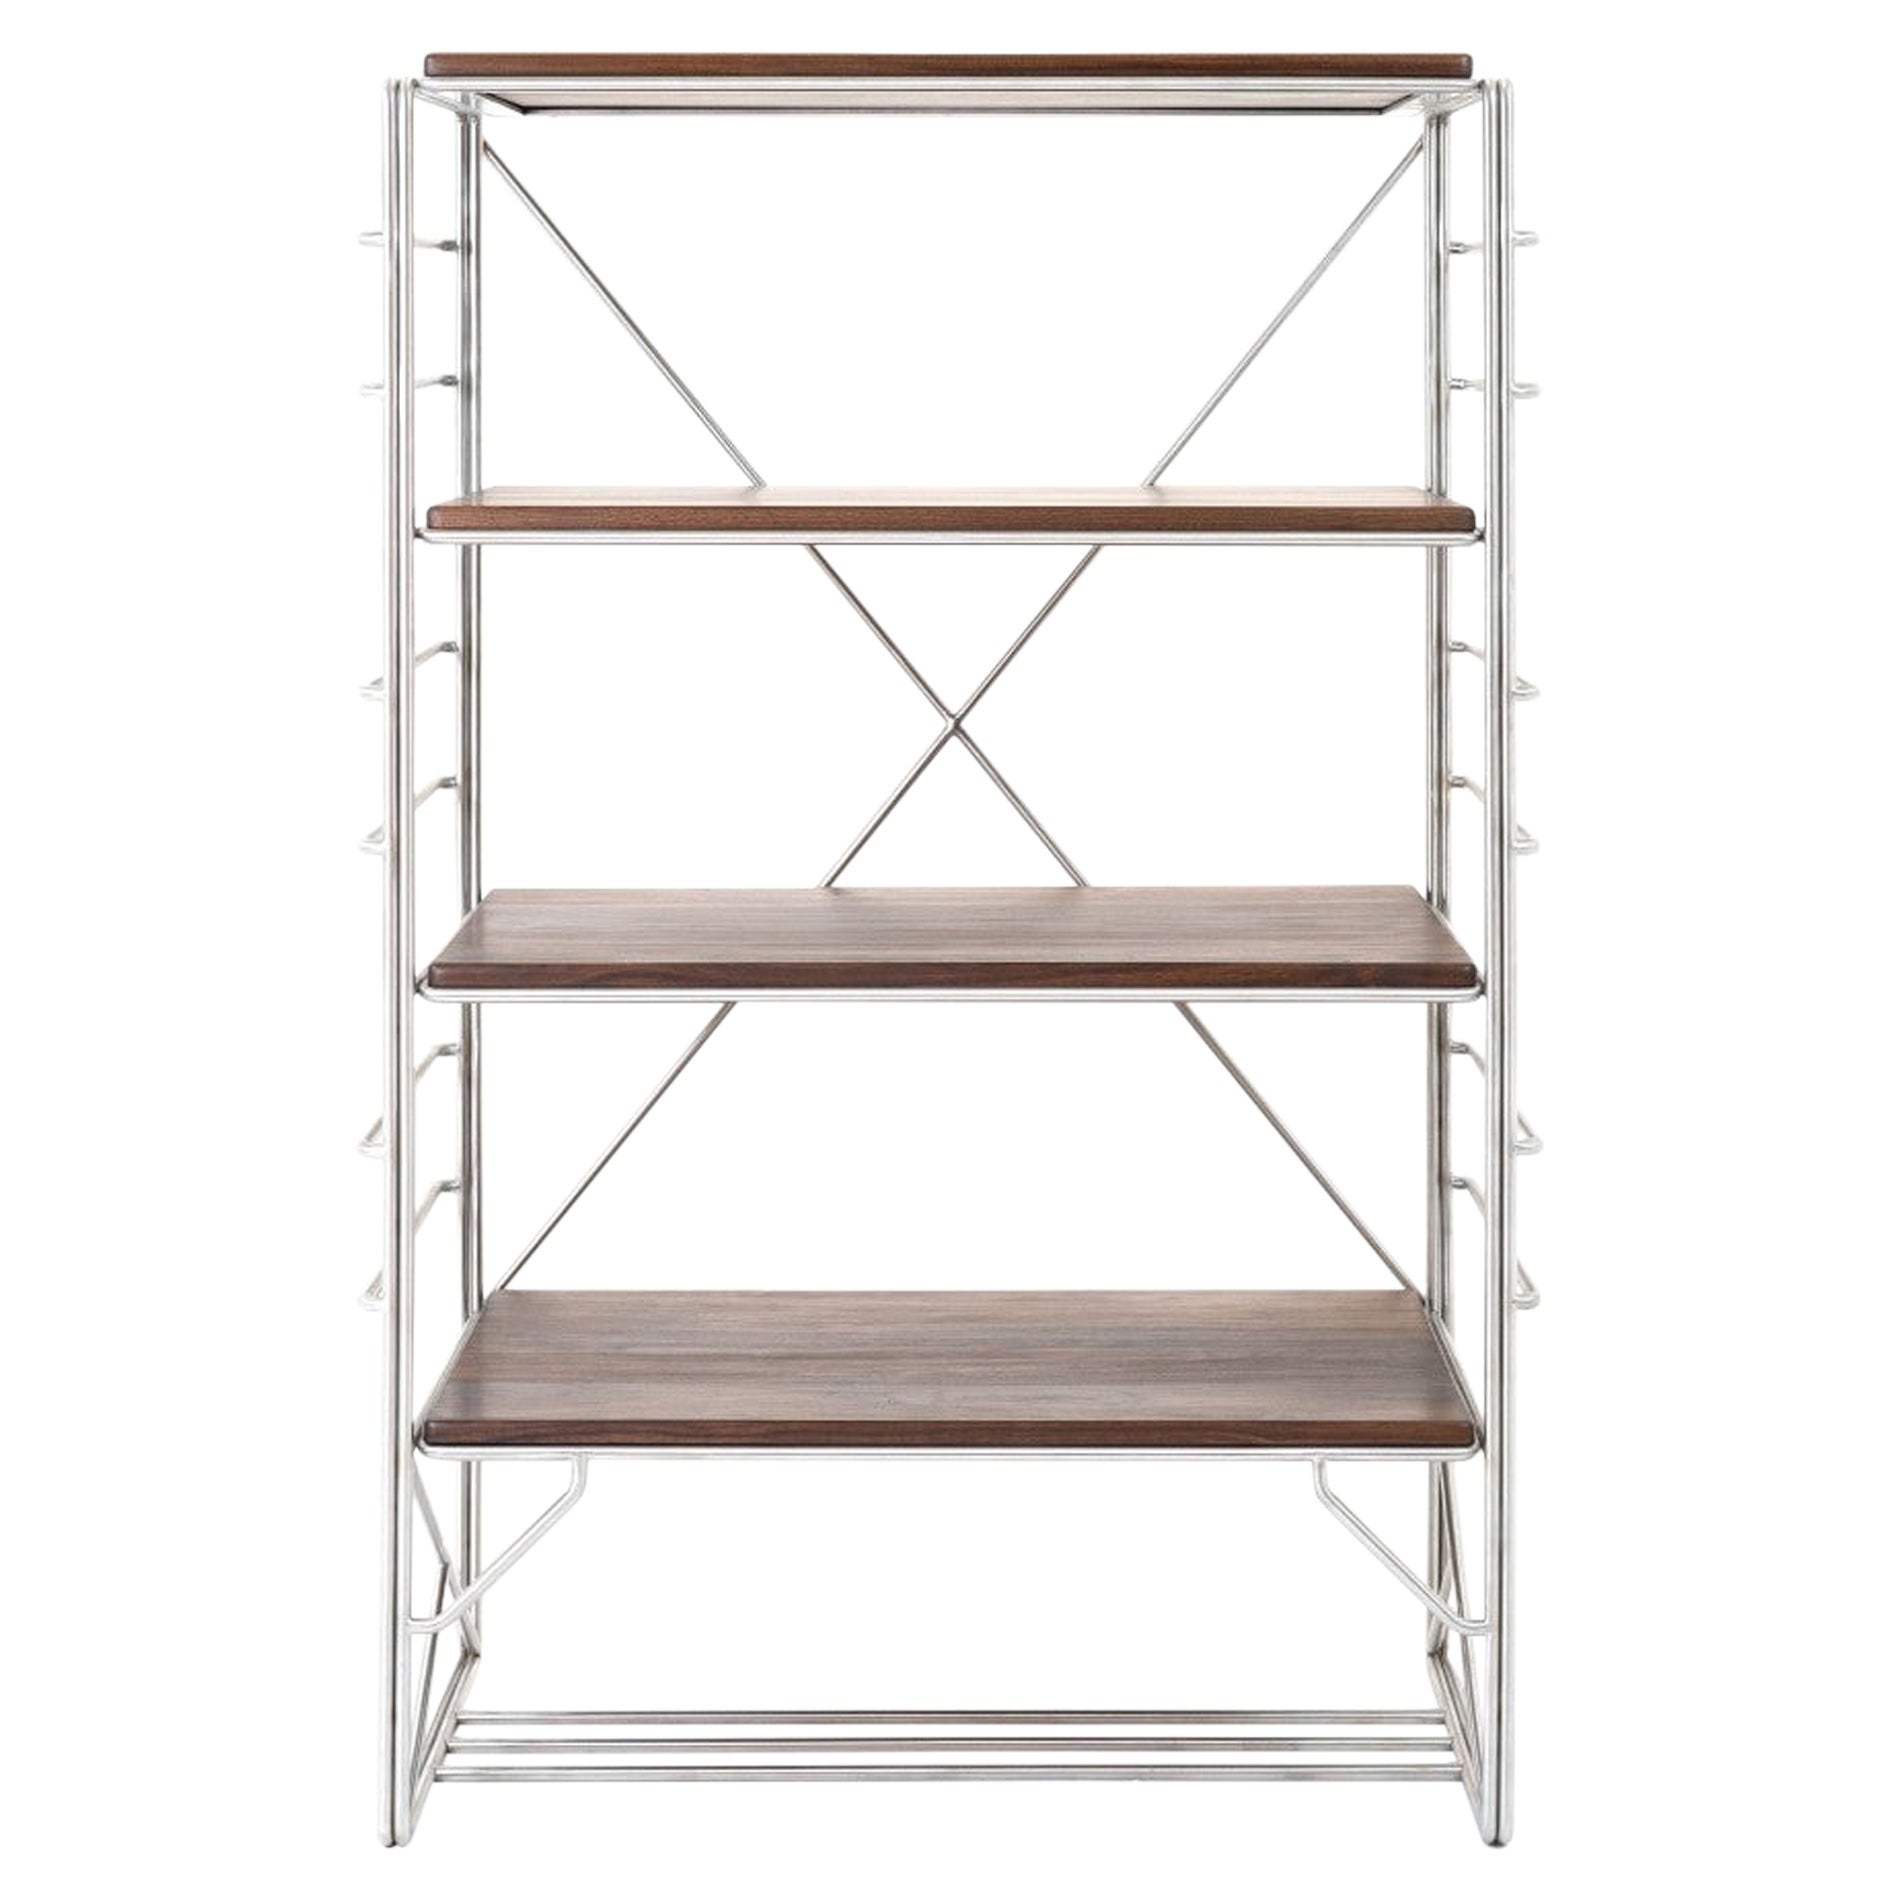 Wired Shelf, Solid Freestanding Display and Storage, in Stainless Steel, Walnut